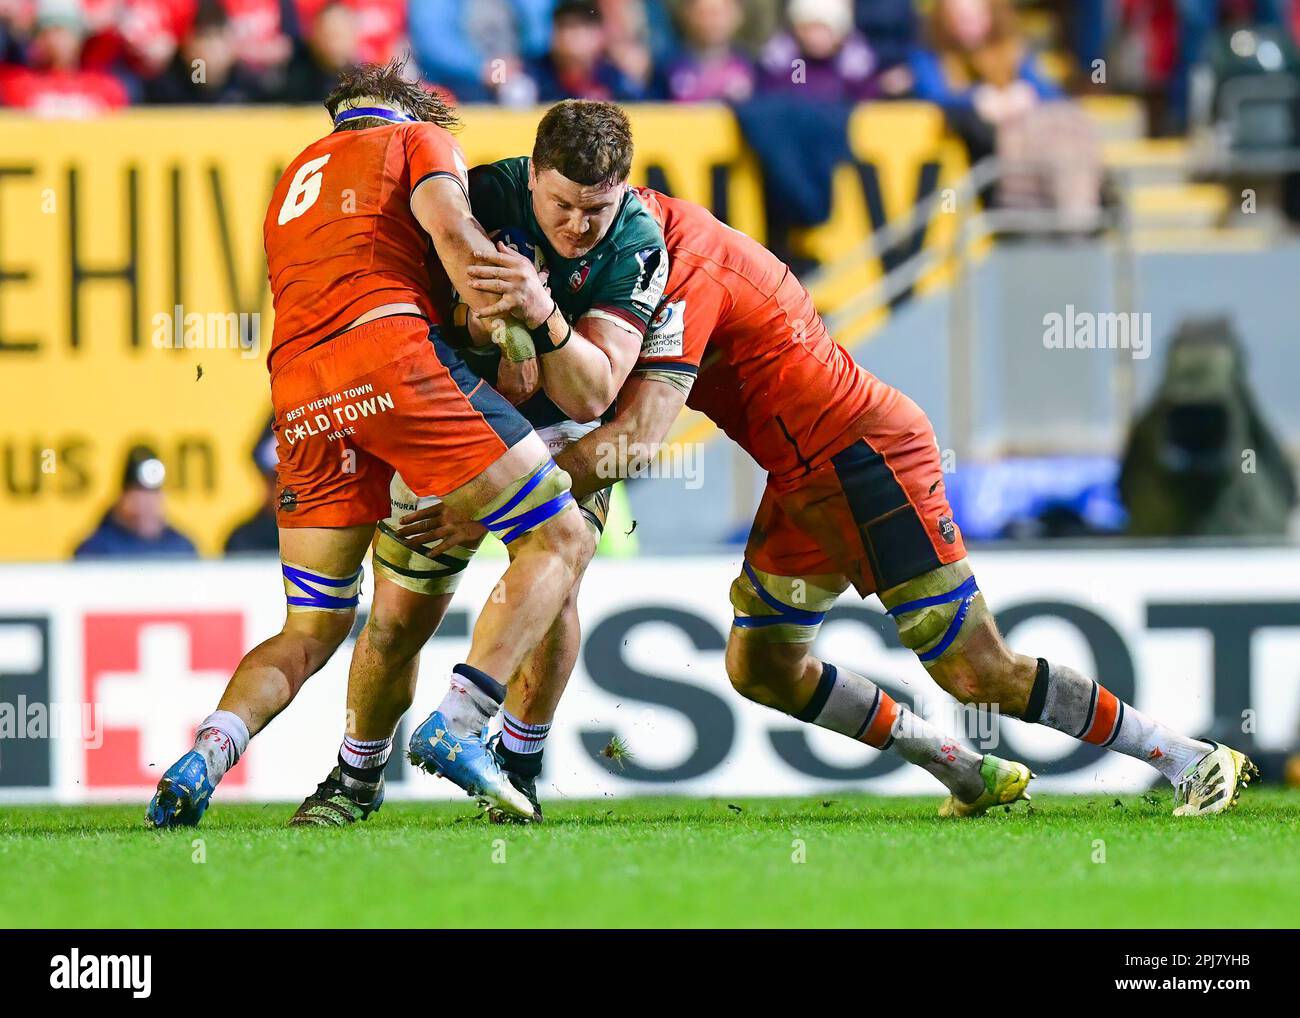 Leicester Tigers Rugby v Edinburgh Rugby Team at the Mattioli Stadium in Leicester, UK on 31 March 2023.  Jasper Weise (Leicester Tigers) tackled by Jamie Ritchie (Edinburgh) at the Mattioli Rugby Stadium, Leicester, Uk  Credit: Mark Dunn/Alamy Live News Stock Photo